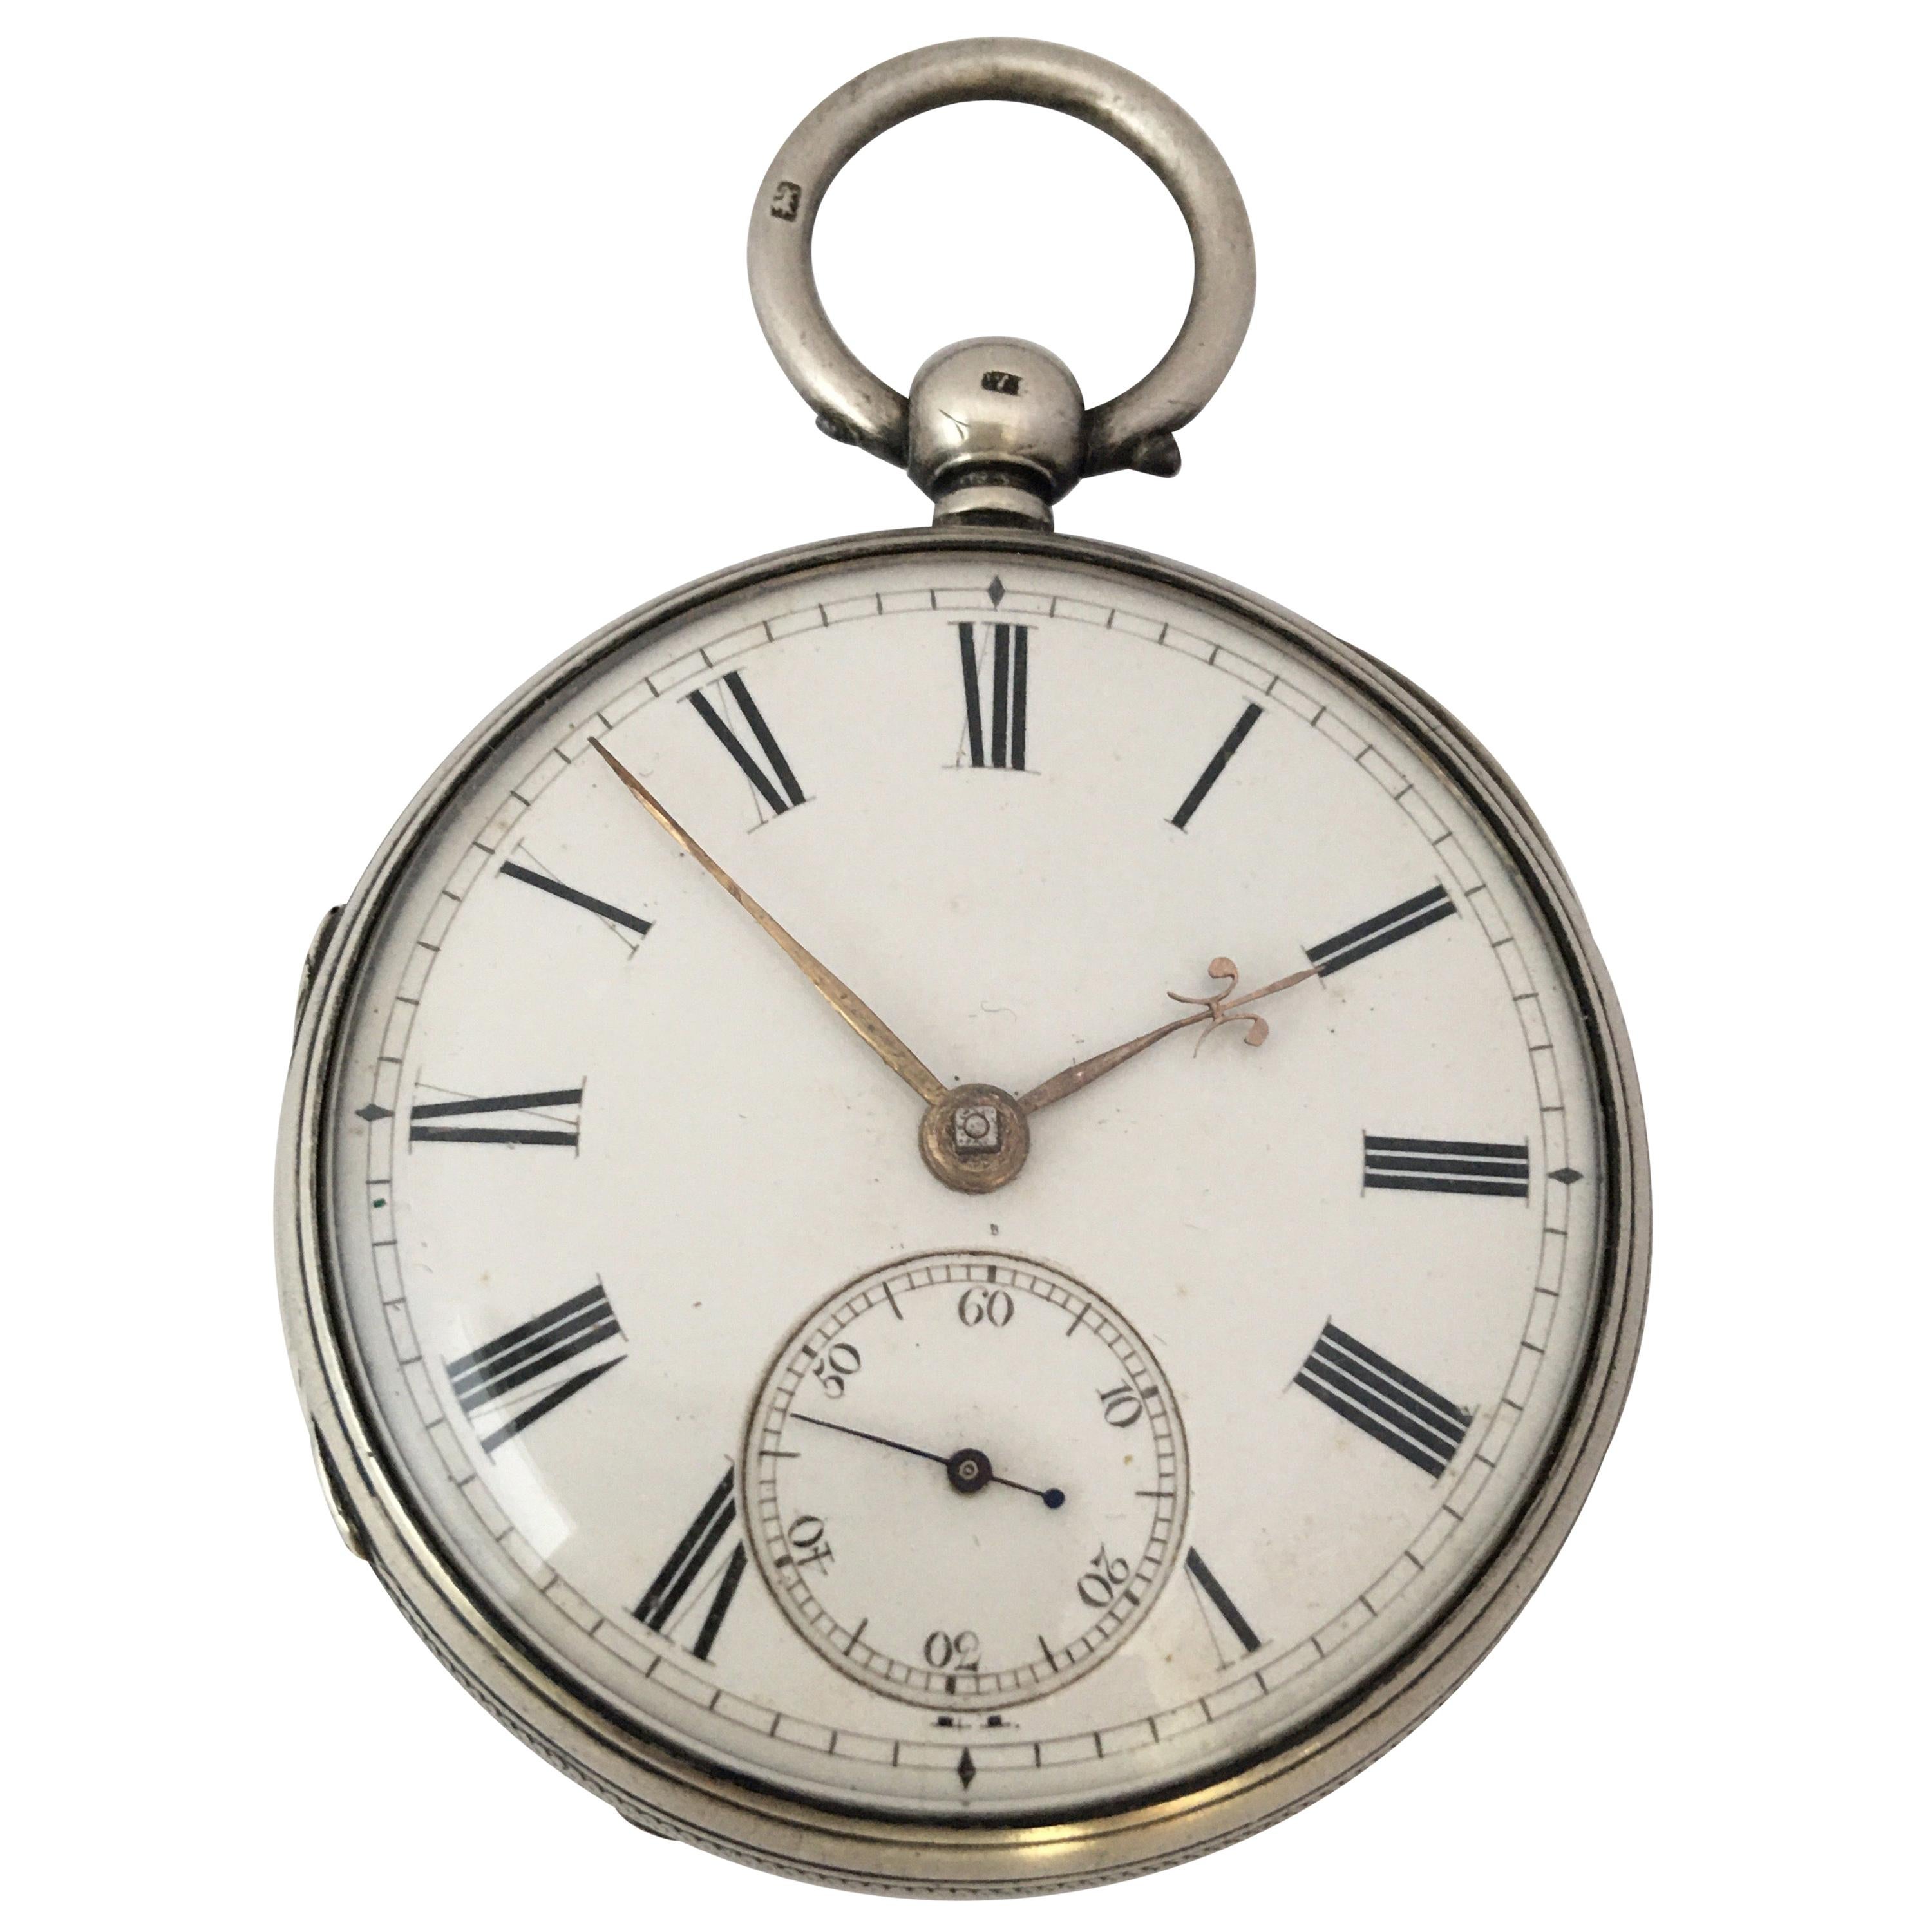 Antique Silver Key-Winding Pocket Watch Signed Charles Reeves, Hereford For Sale